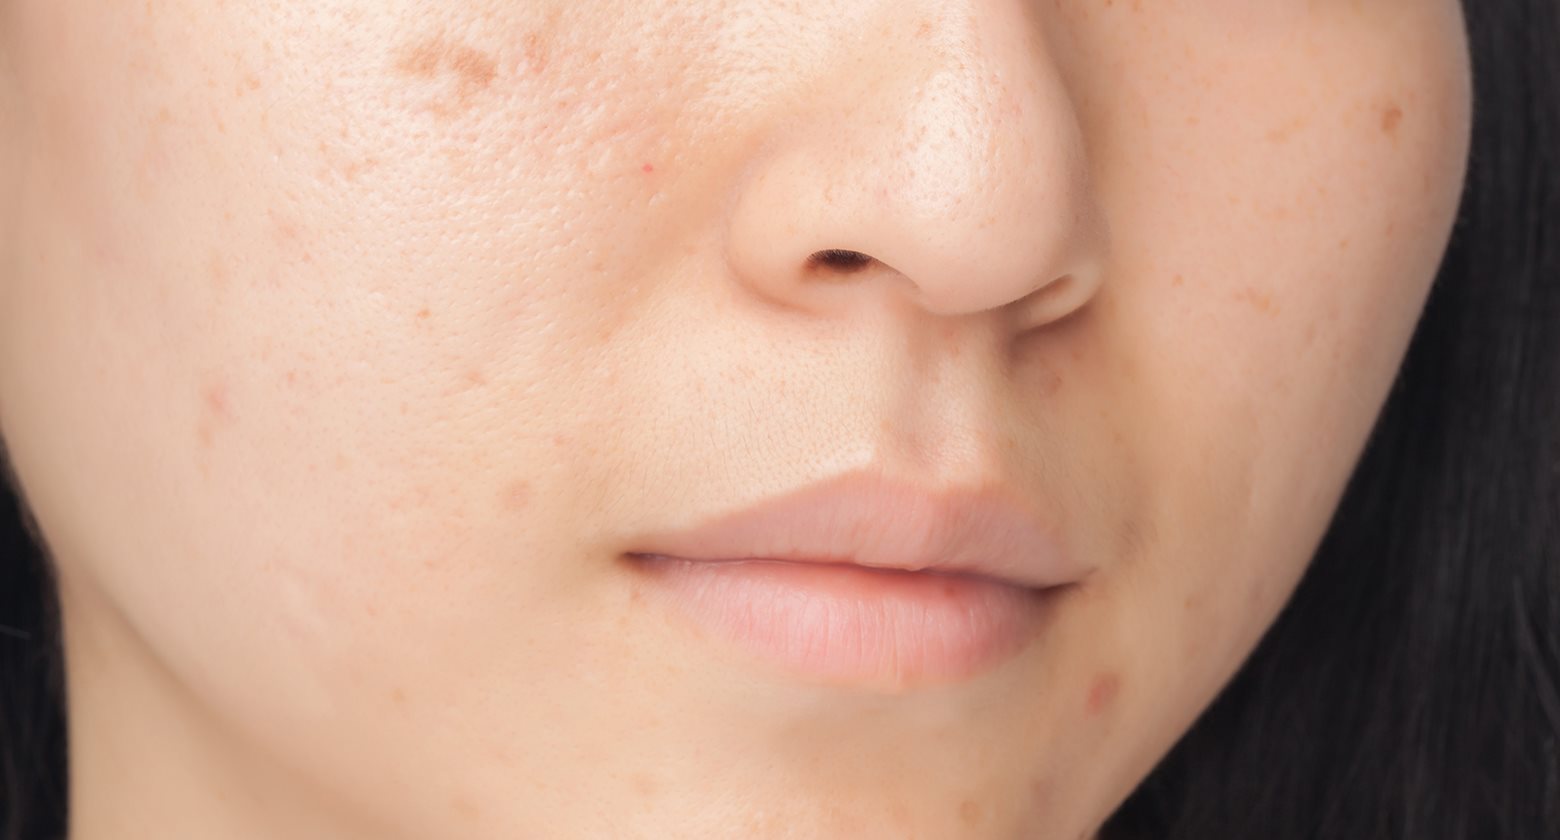 Pimple marks can be reduced and removed